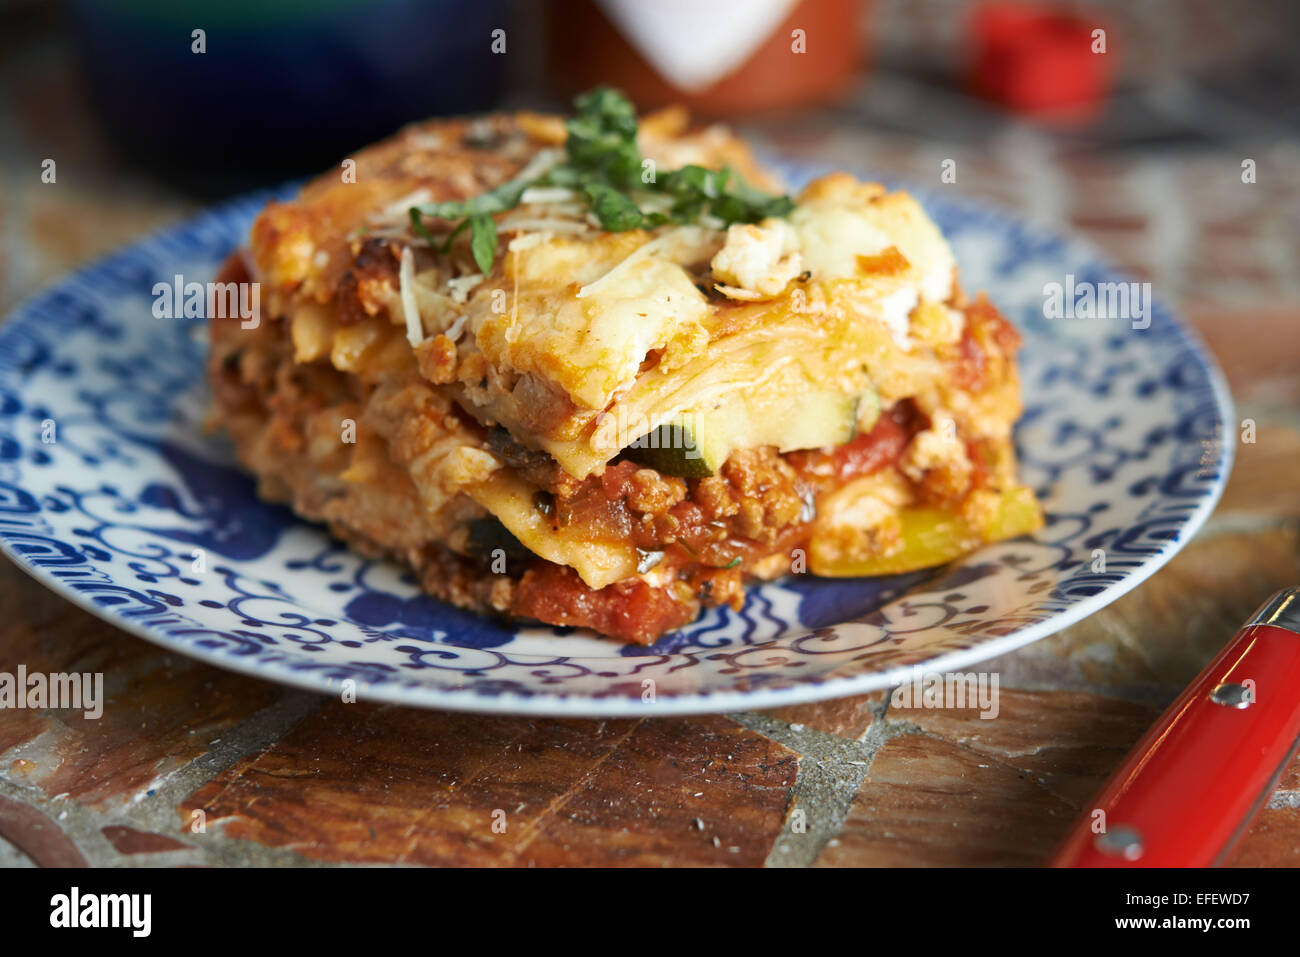 Lasagna on a plate from a side view with natural light with veggies and meat Stock Photo